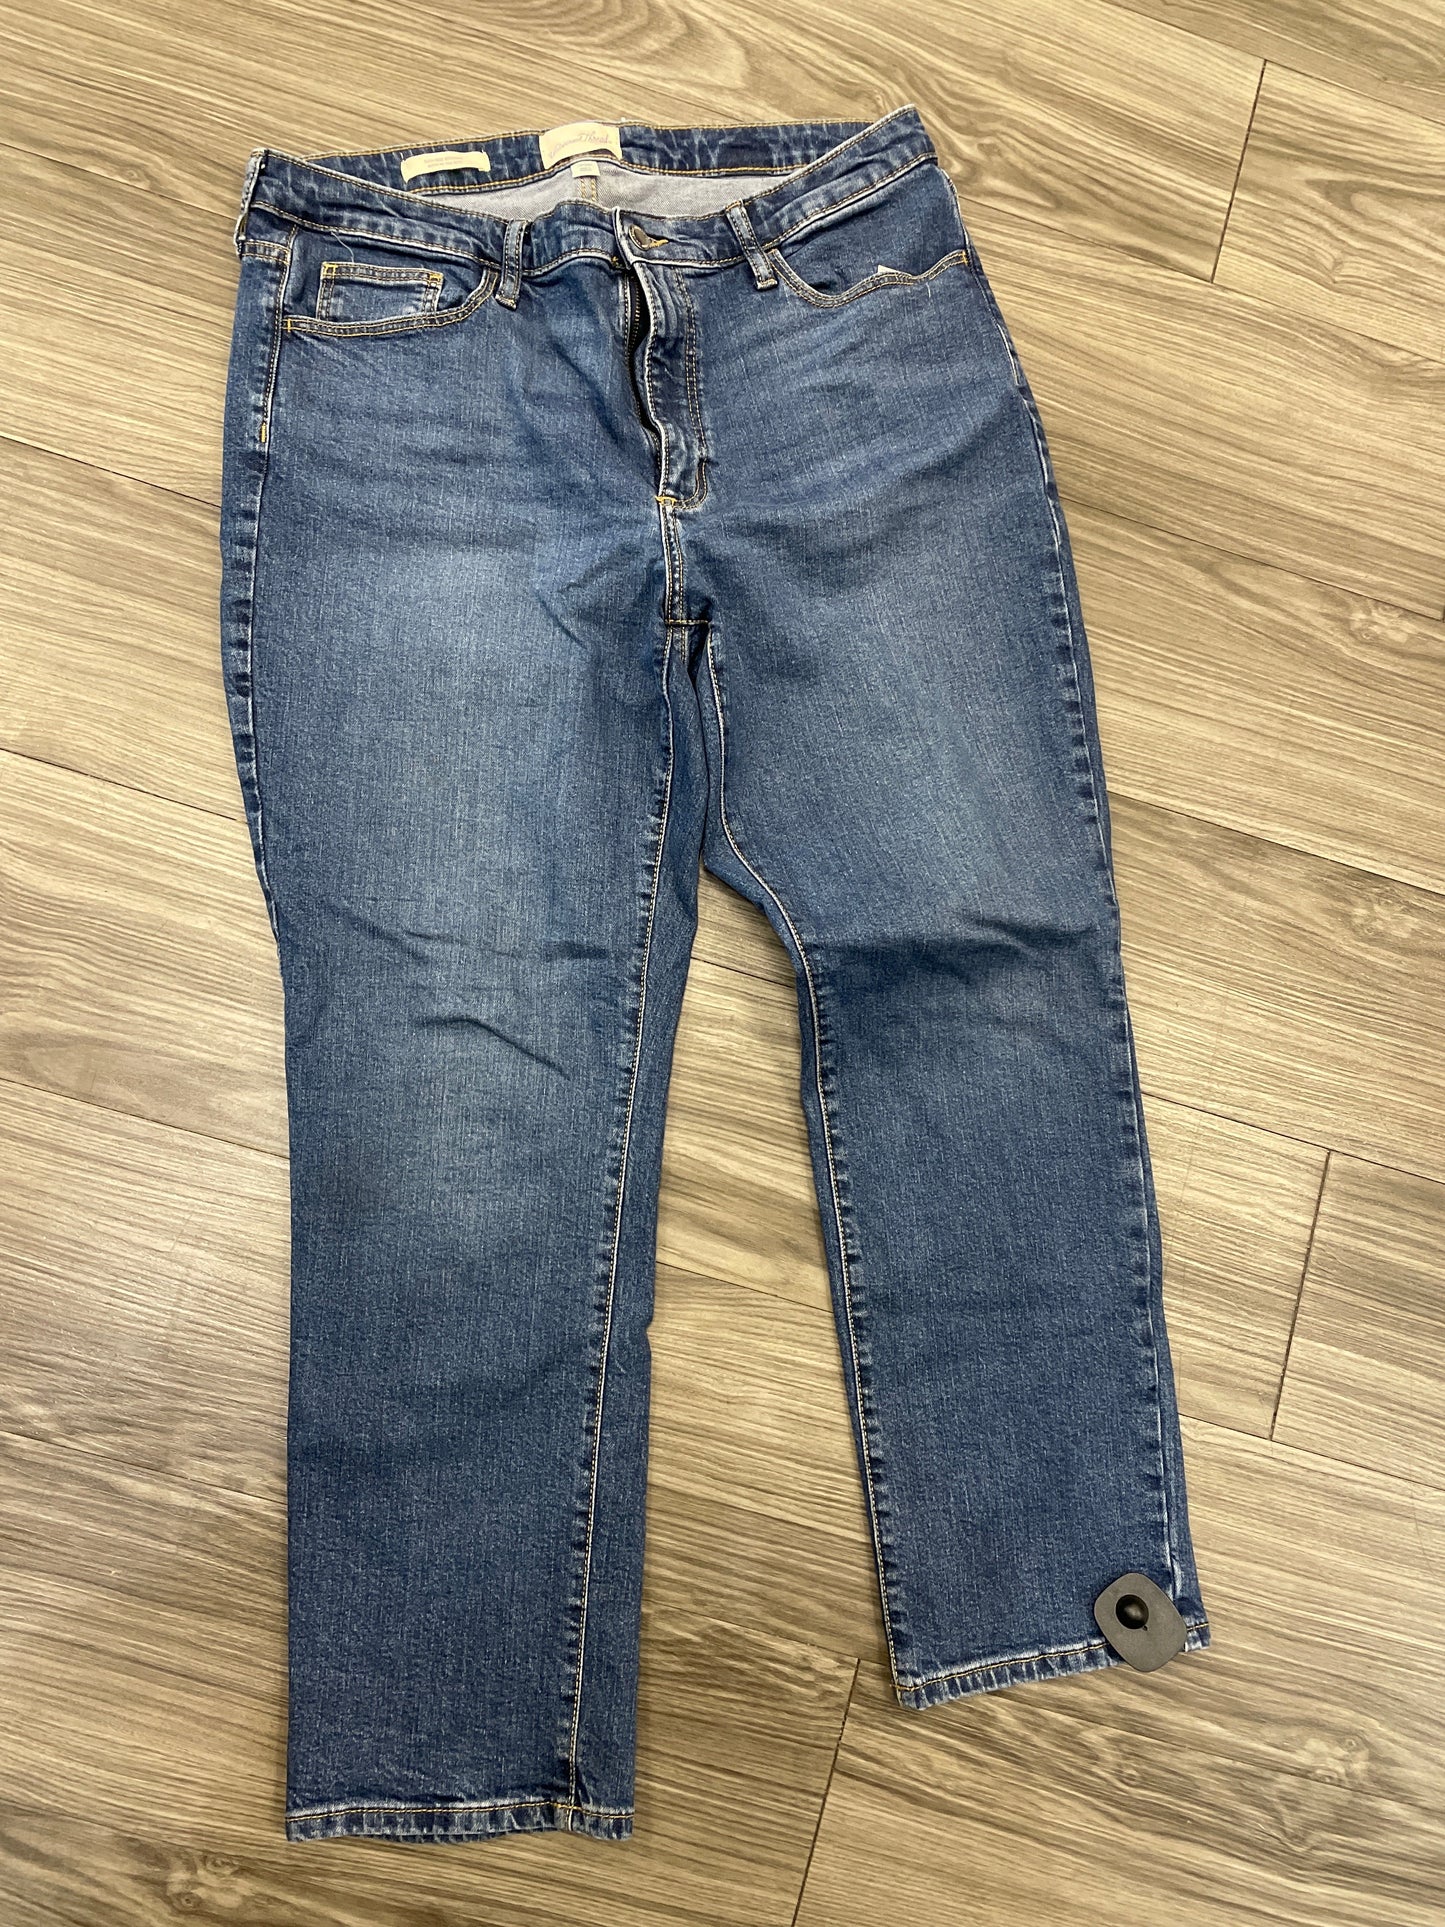 Jeans Skinny By Universal Thread  Size: 14